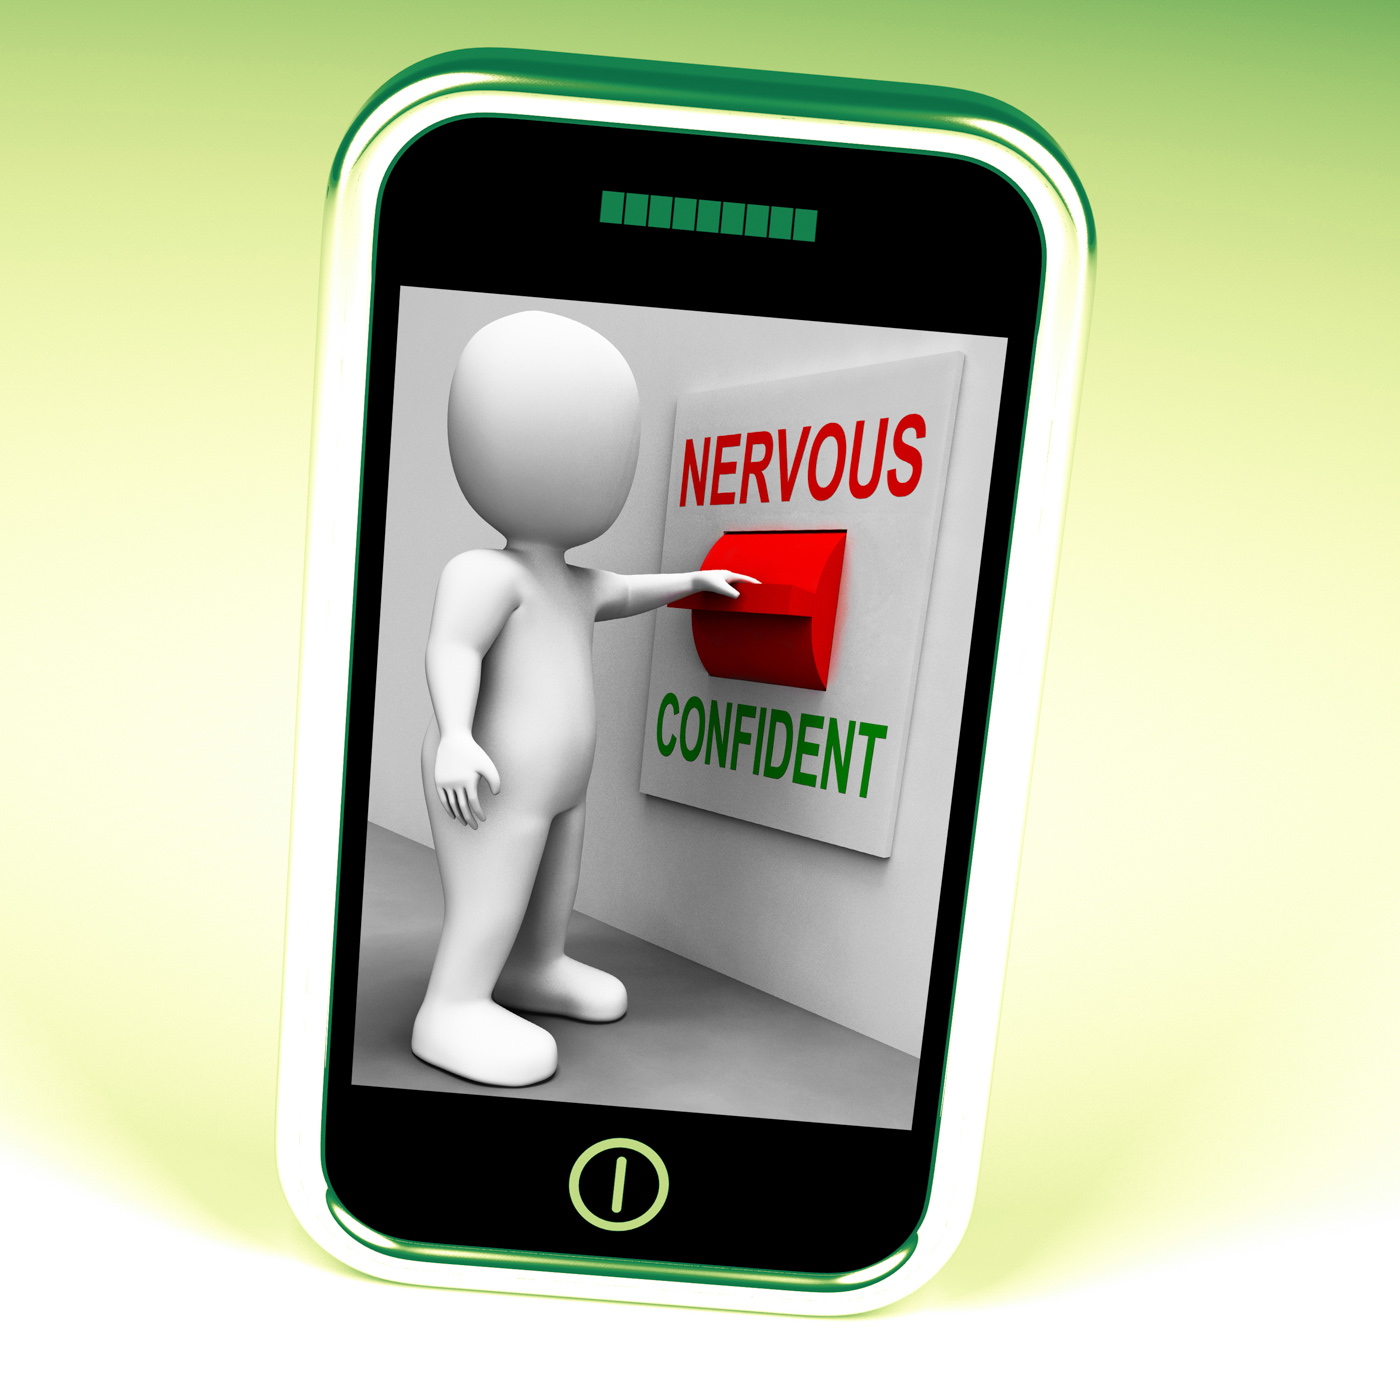 Nervous confident switch shows nerves or confidence photo